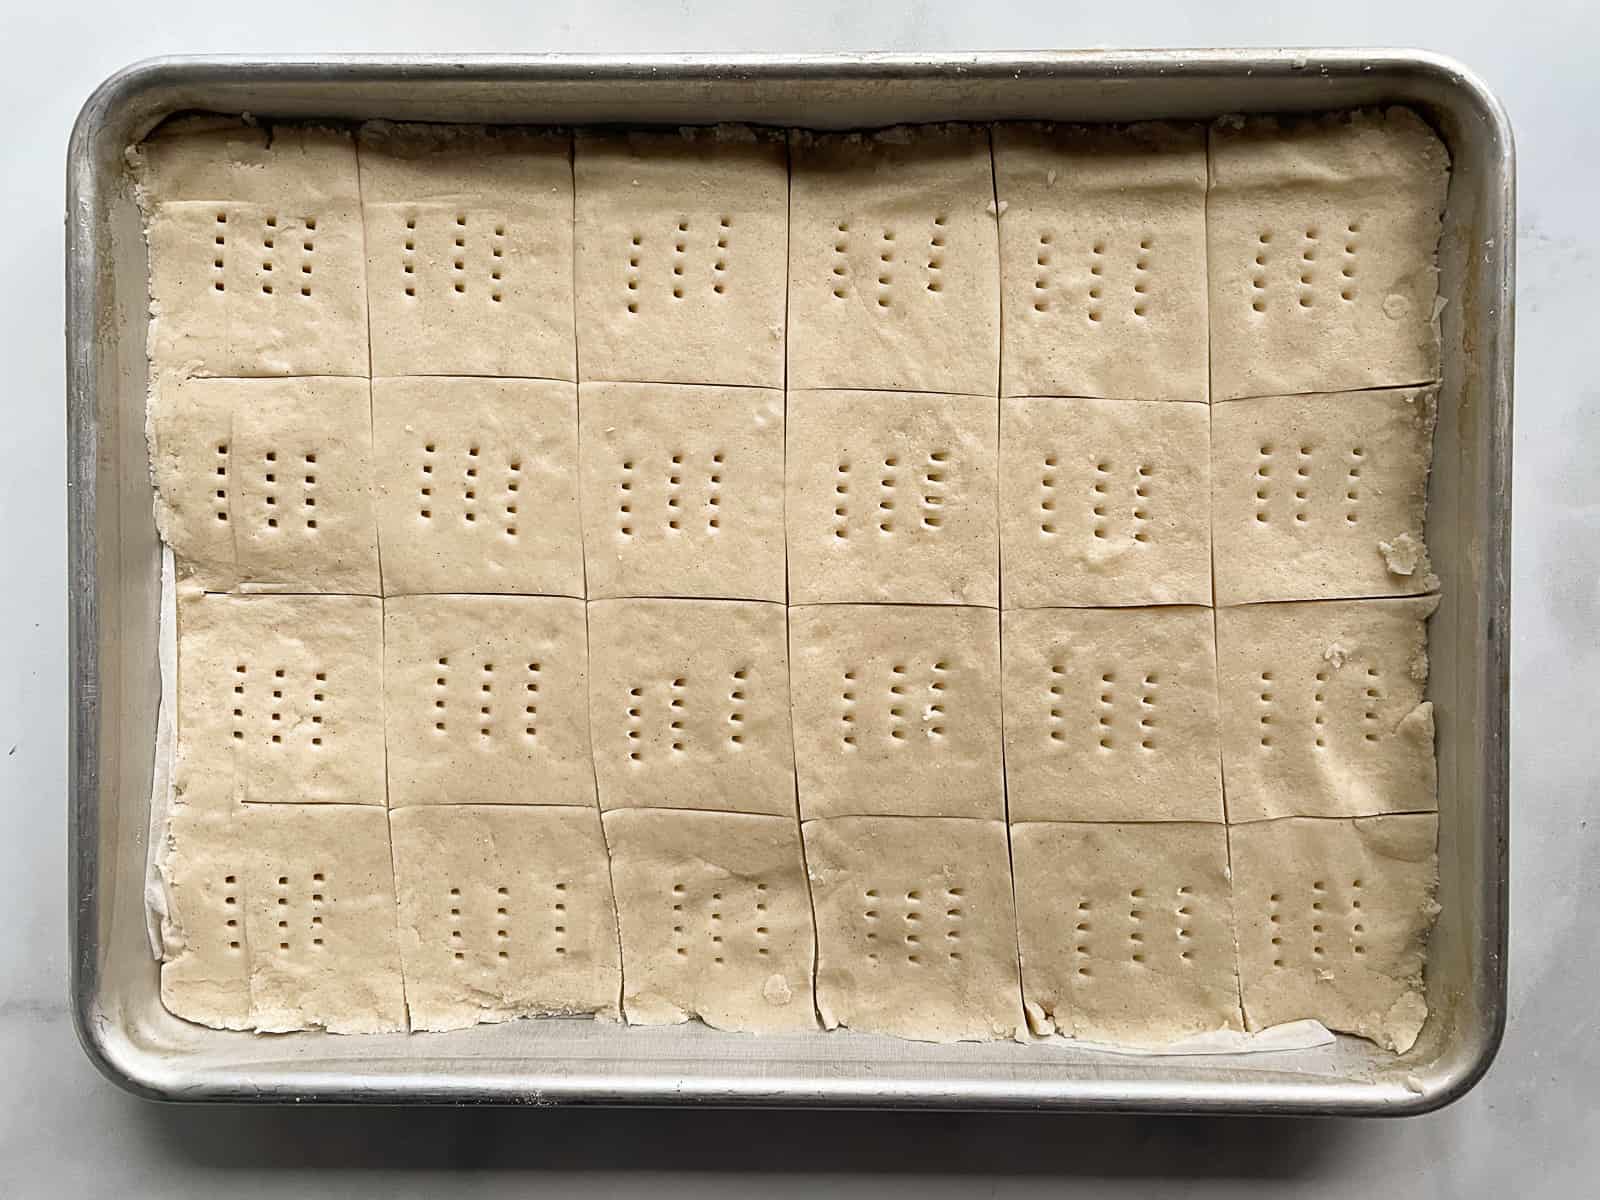 Gluten-free shortbread dough pressed into a pan and scored into squares.